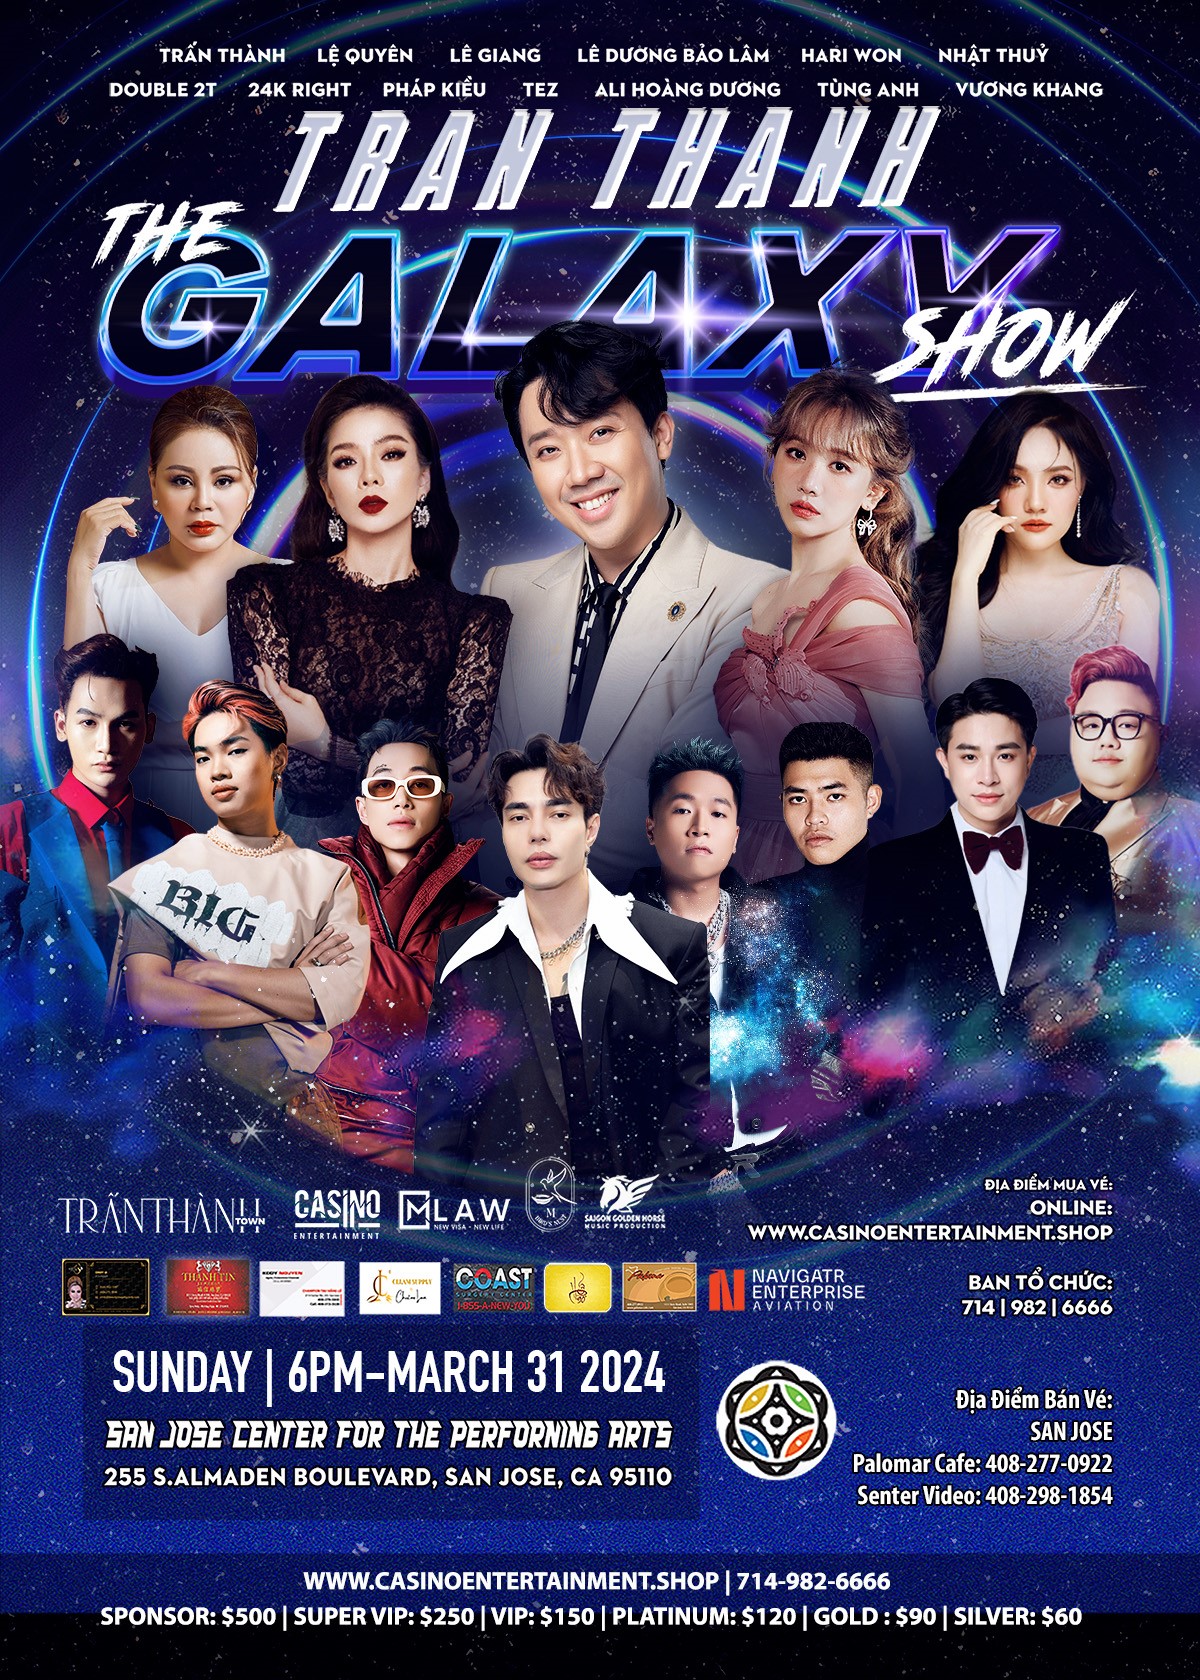 The Galaxy Show of Trấn Thành at San Jose Center for The Perforning Arts on Mar 31, 18:00@San Jose Center For Performing Arts - Pick a seat, Buy tickets and Get information on www.casinoentertainment.shop casinoentertainment